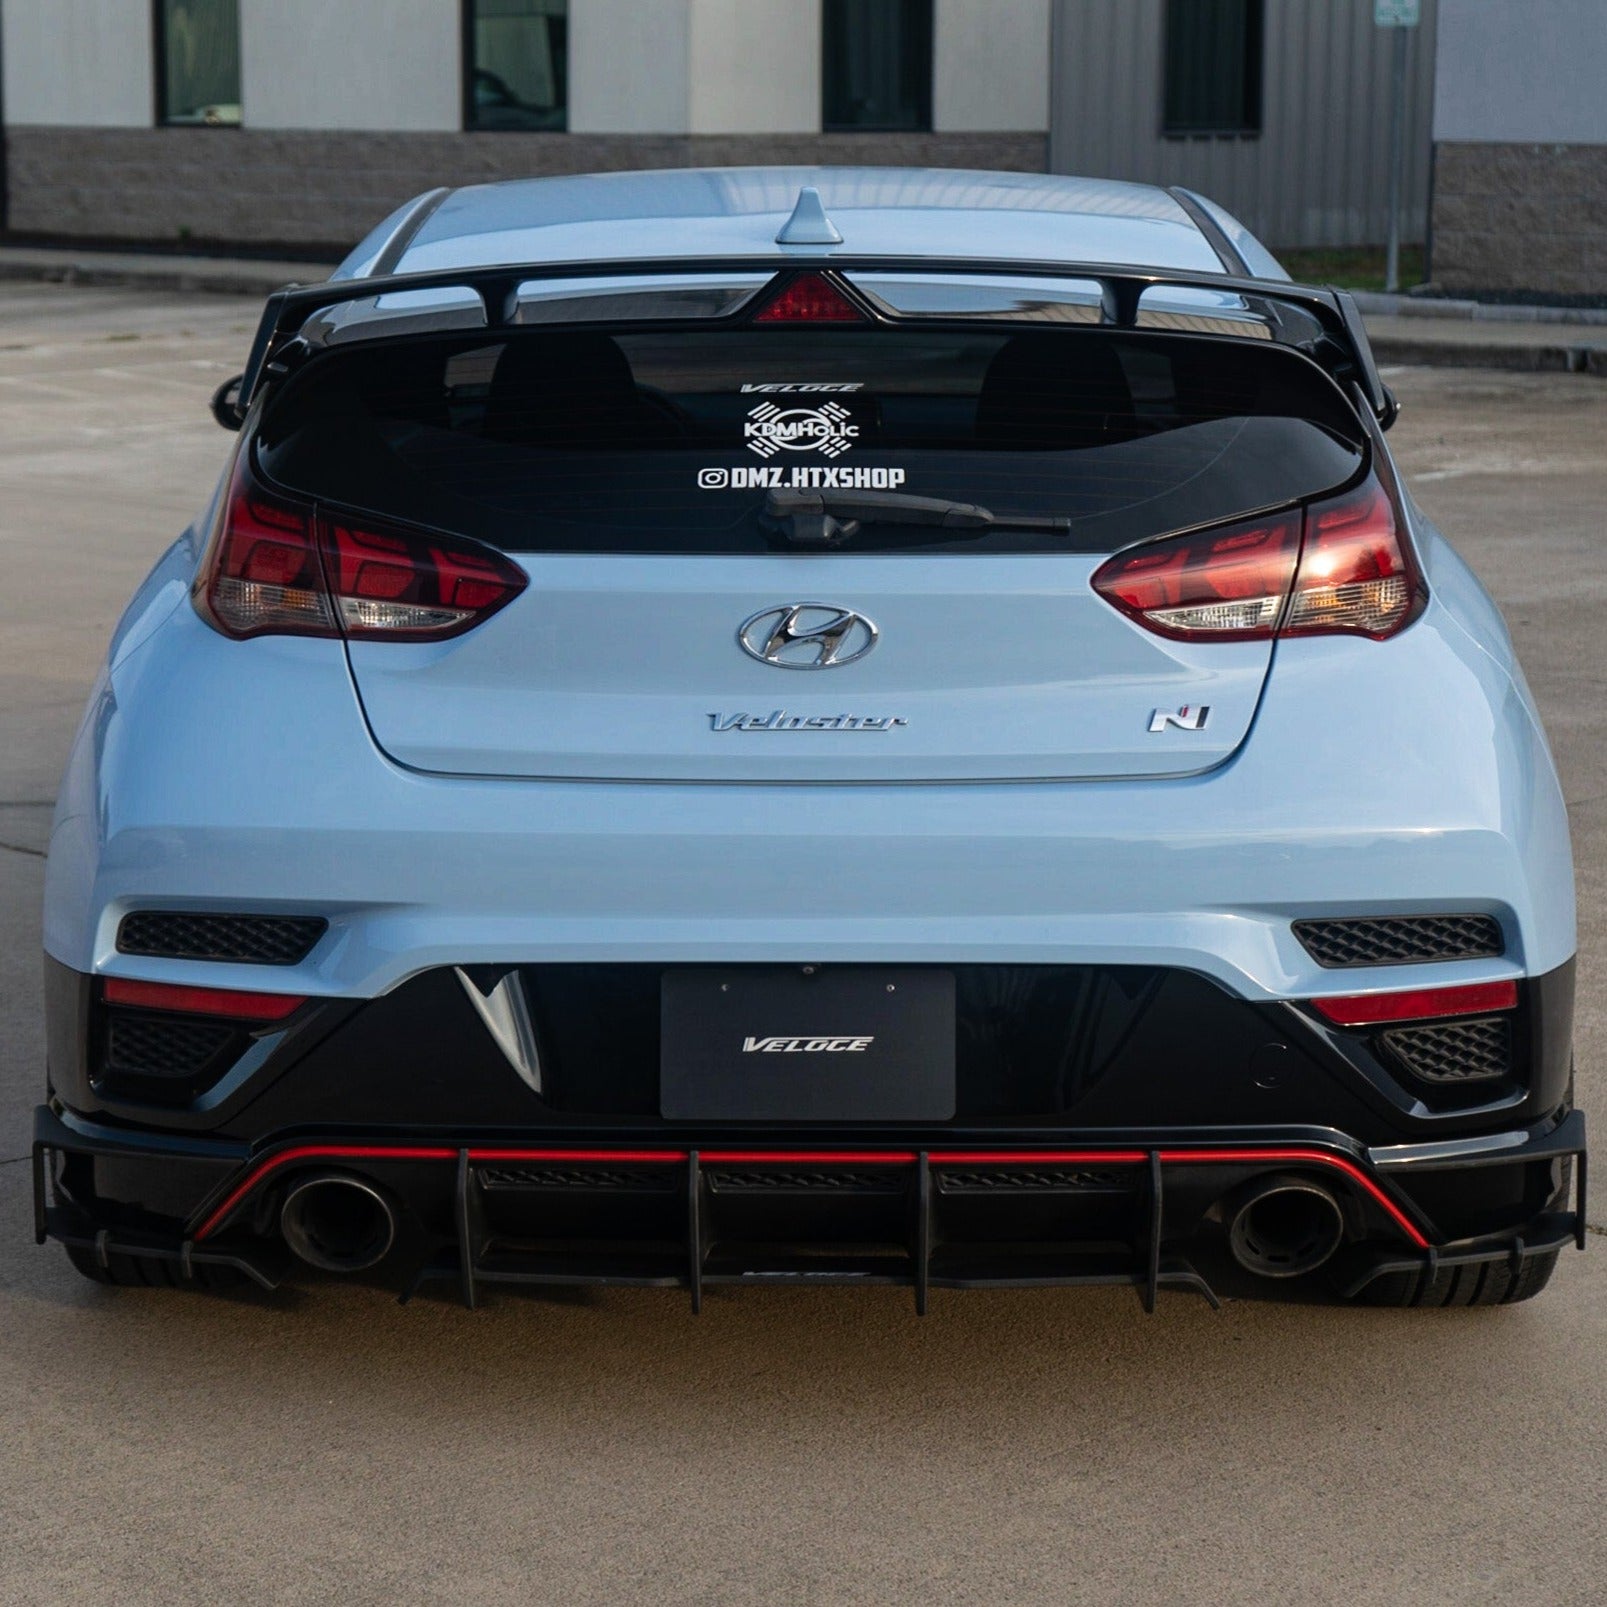 [KDMHolic Collection] VELOCE Rear Wing Spats + Diffuser with Fins for Hyundai Veloster N 2019+